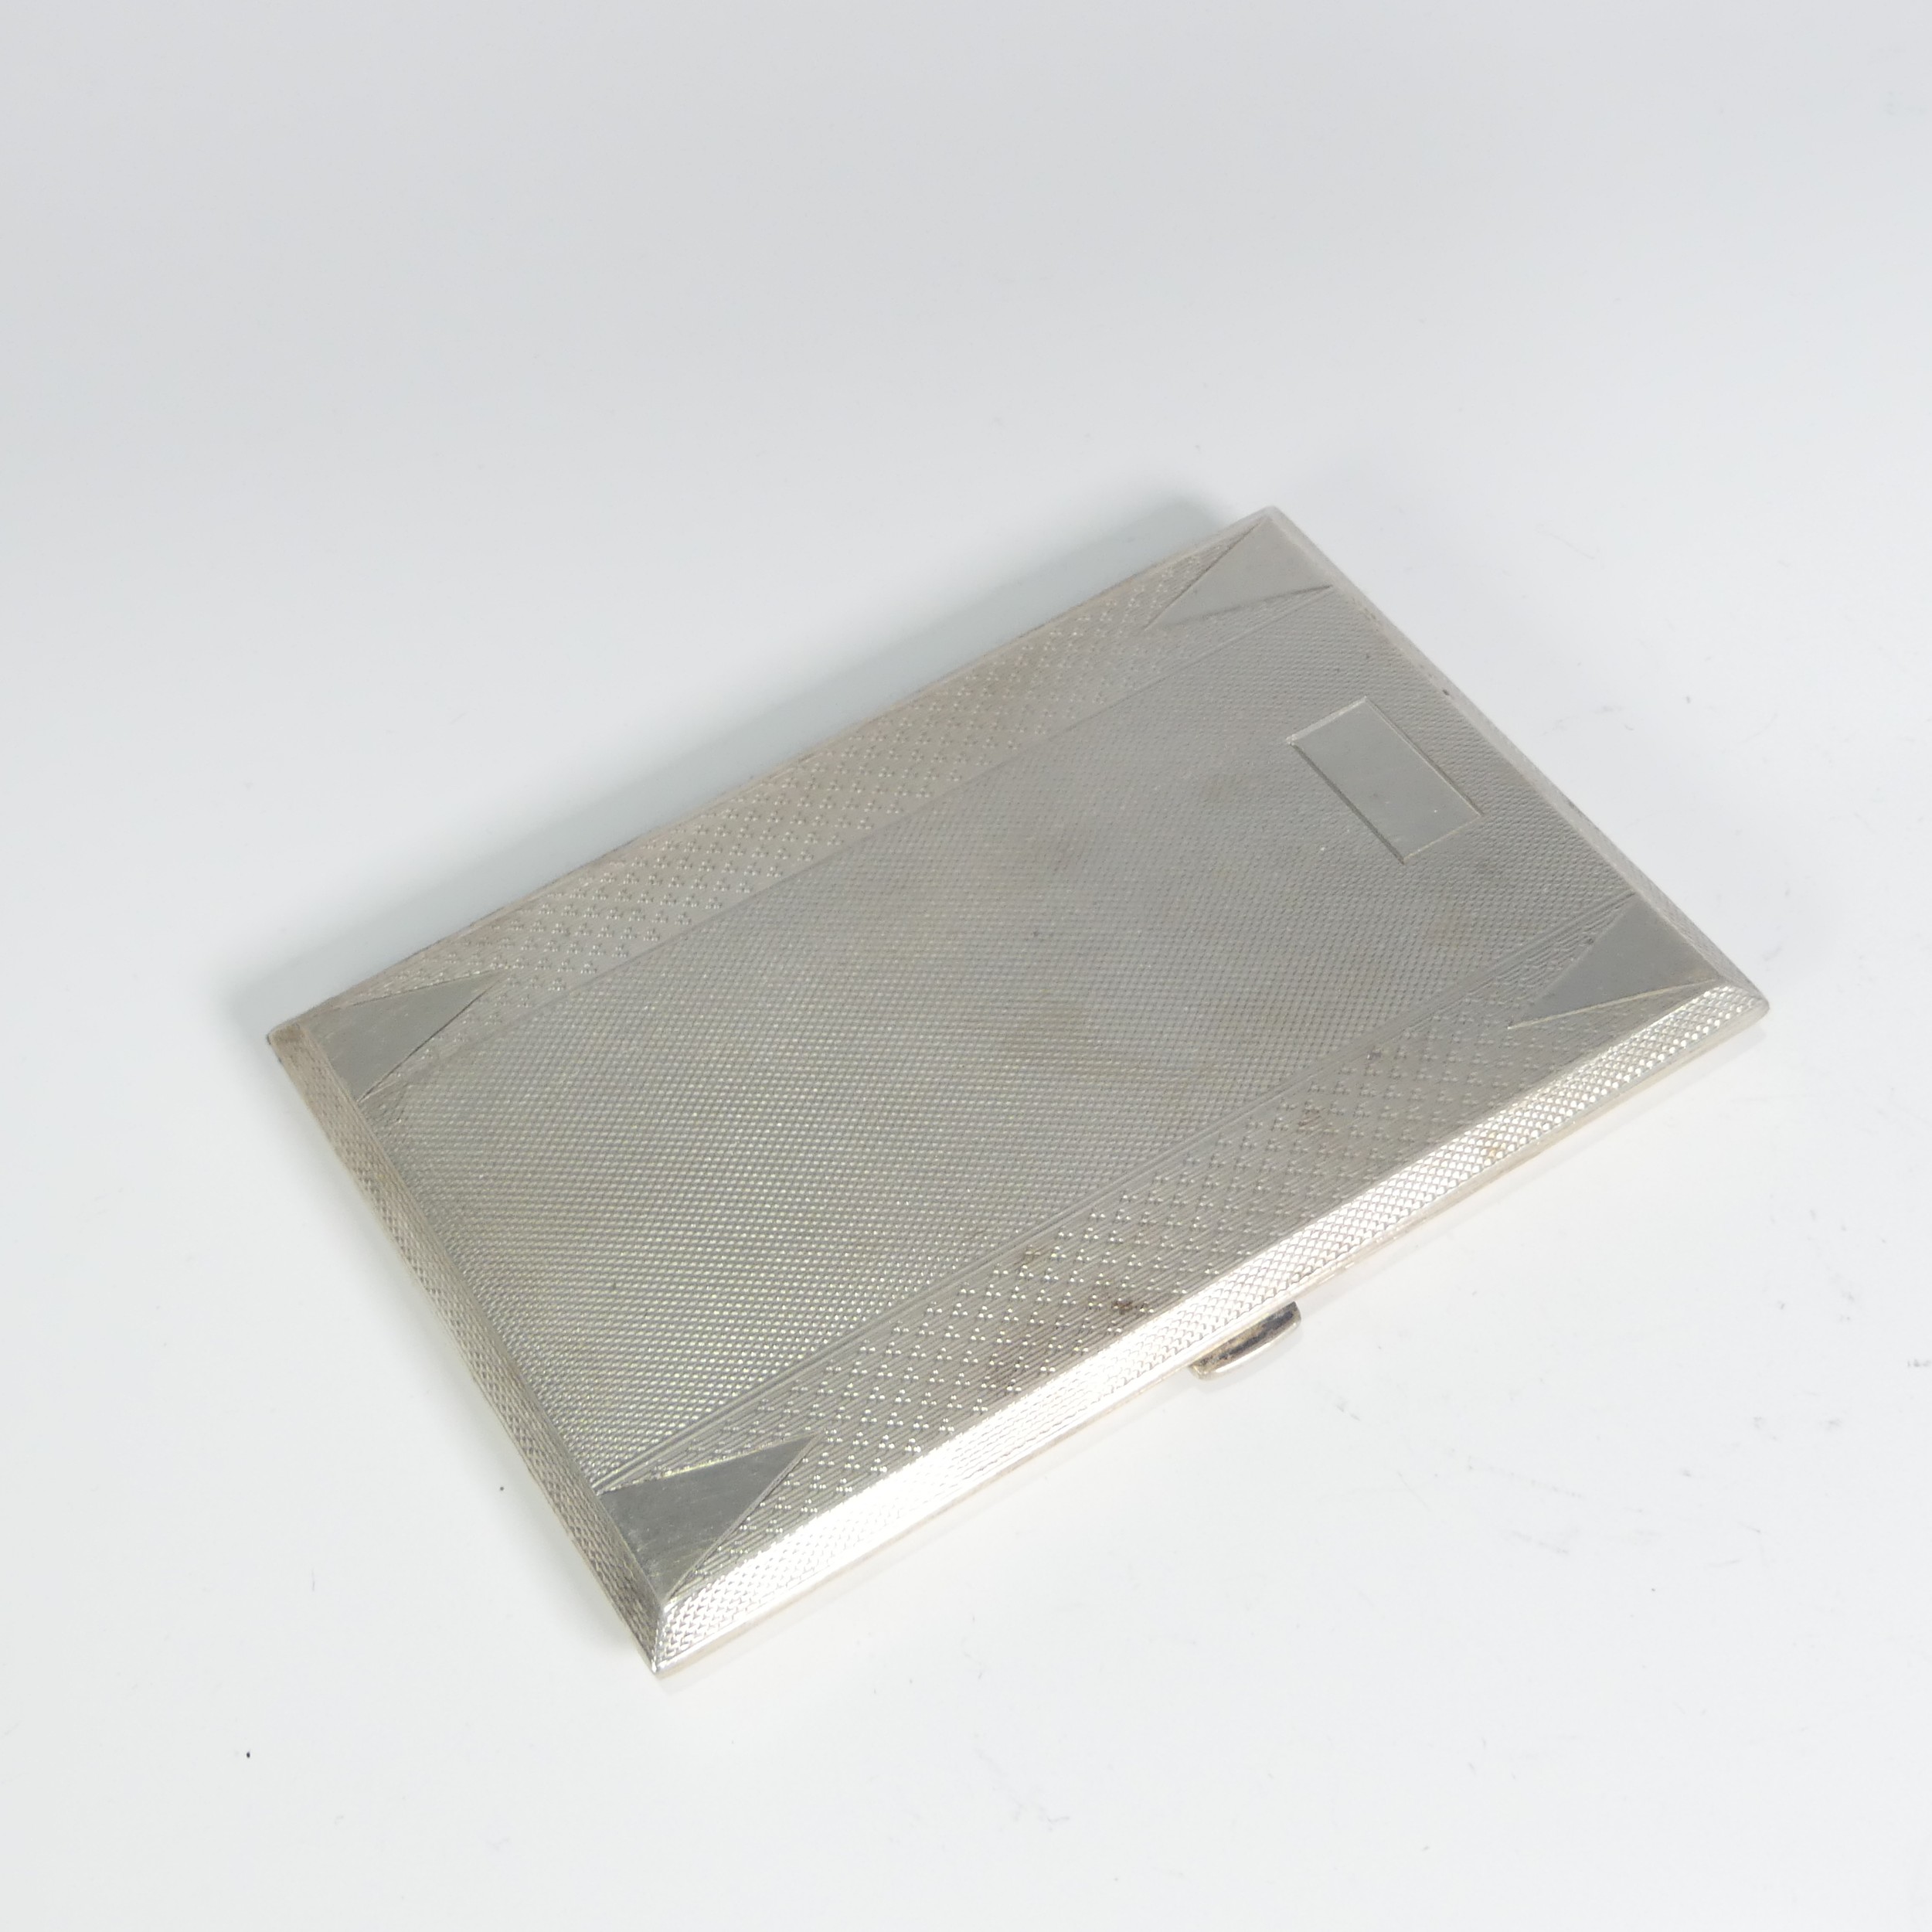 A George V silver Cigarette Case, by S W Goode & Co., hallmarked Birmingham 1933, of hinged